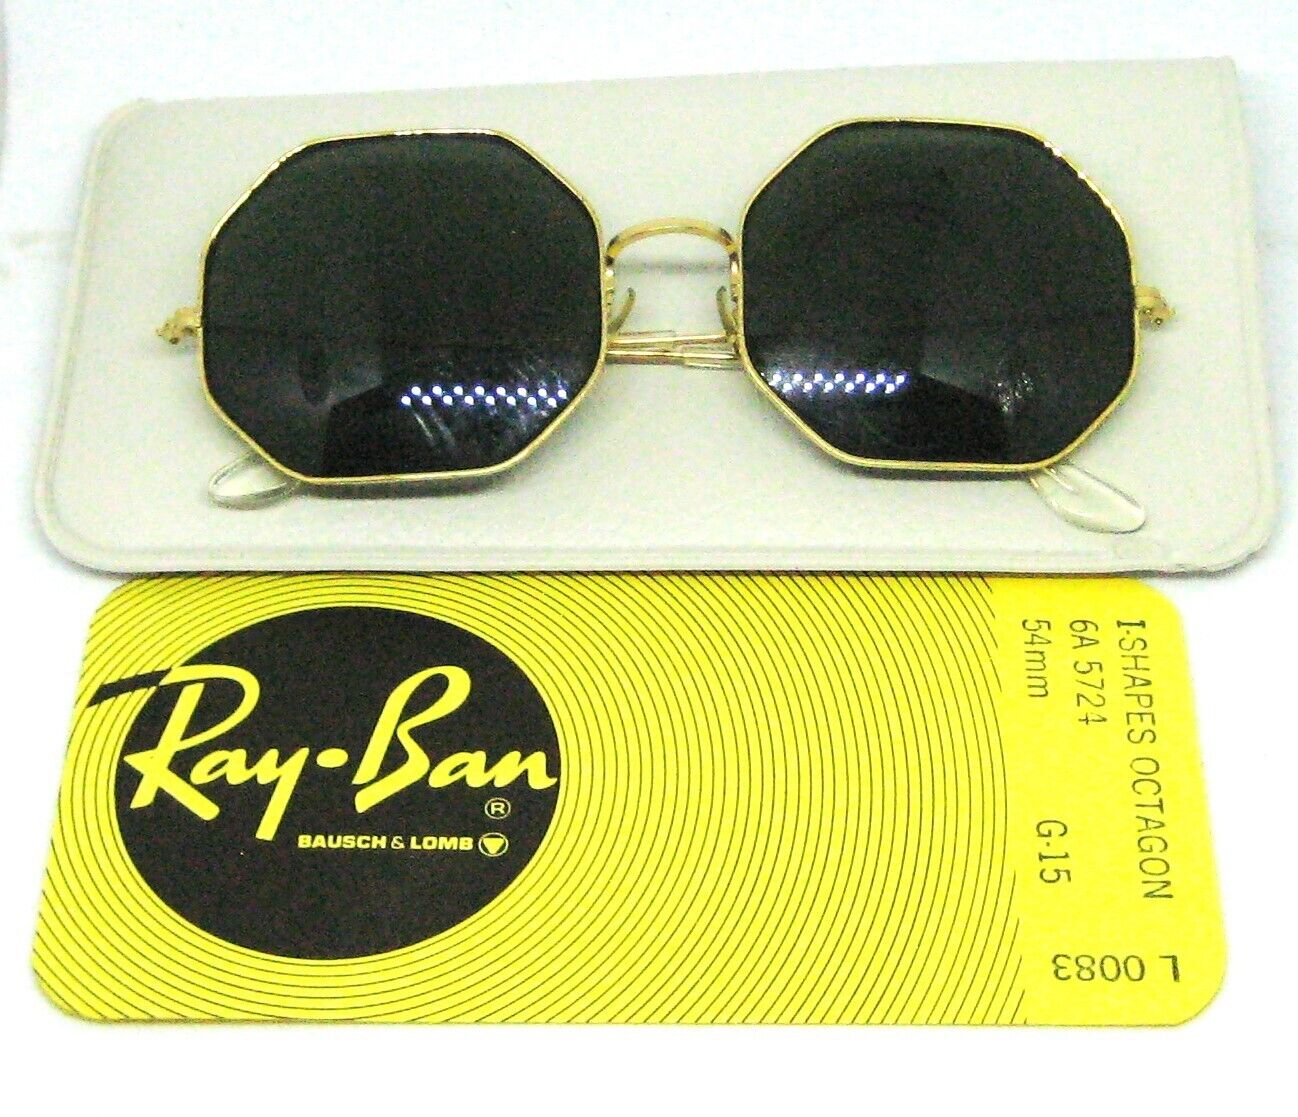 Ray-Ban USA 1960s Vintage B&L Shapes Collection L0083 Octagon NOS Sunglasses